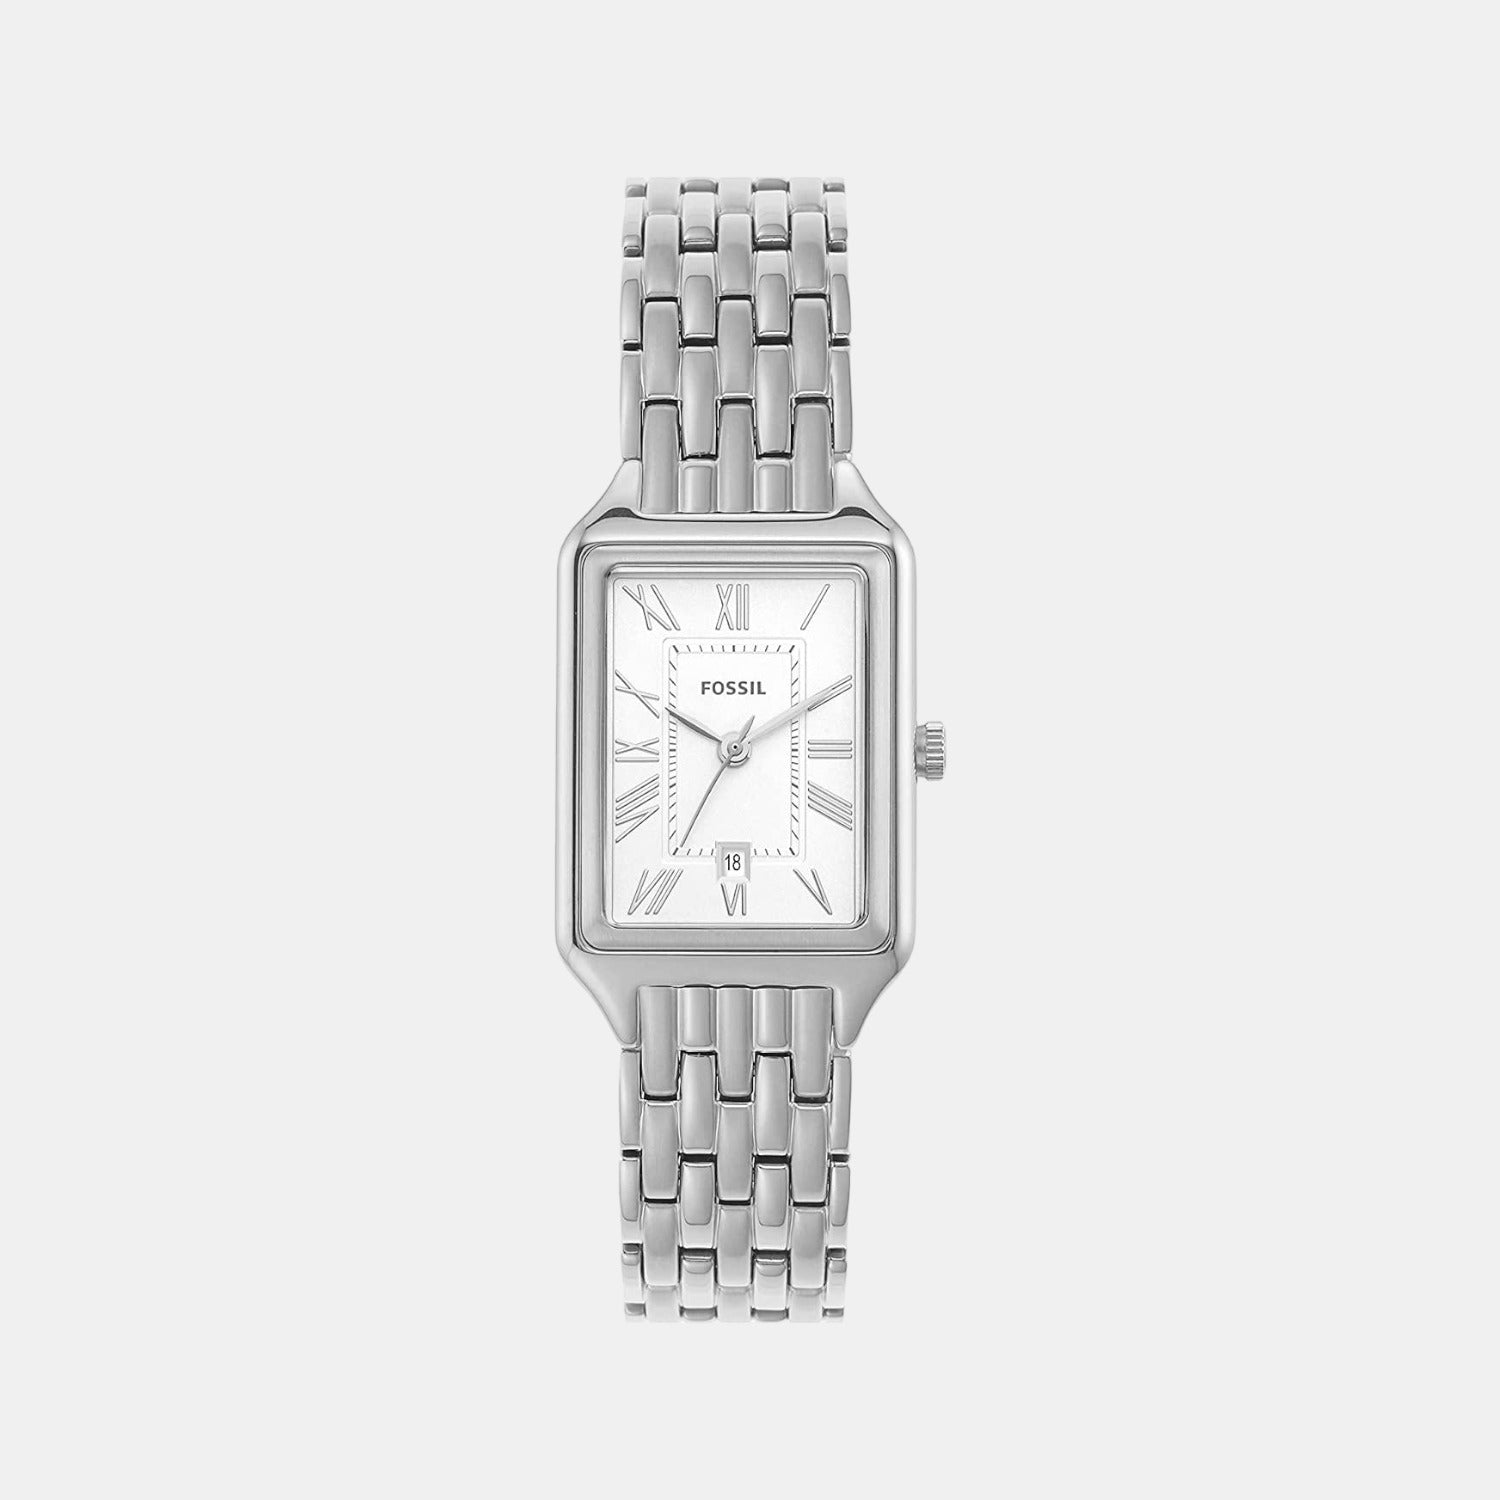 Fossil Women's Rectangular Dial Quartz Silver Watch – Just In Time